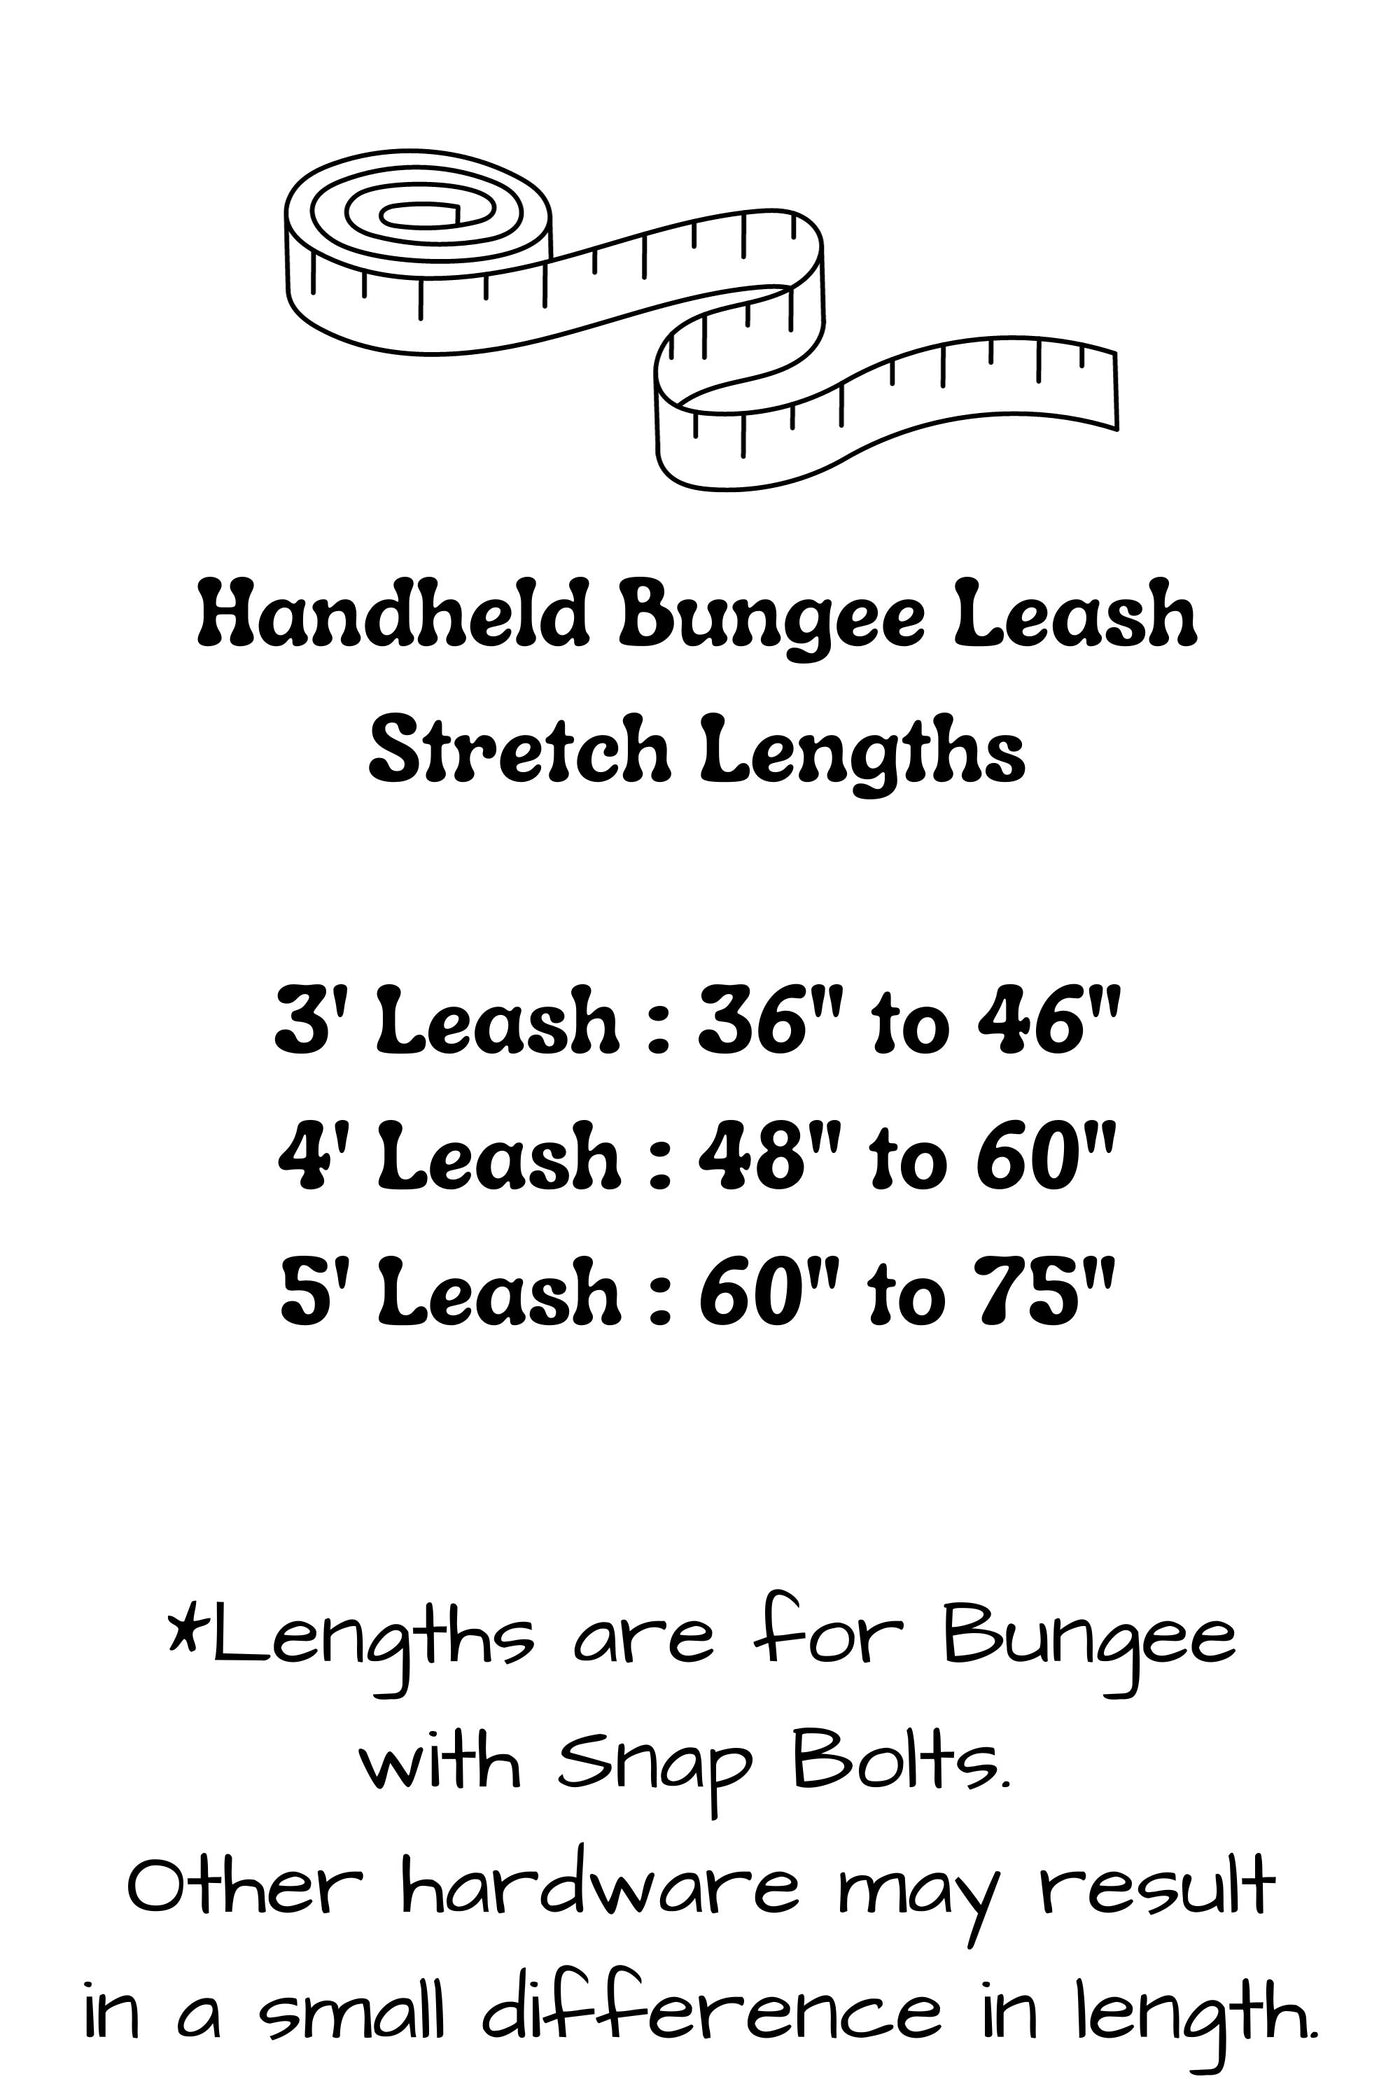 Handheld bungee leashes have the following stretch lengths: 3 foot leash stretches from 36 inches to 46 inches, 4 foot leash stretches from 48 inches to 60 inches, and the 5 foot leash stretches from 60 inches to 75 inches. Hardware selection may result in a small difference in these lengths.